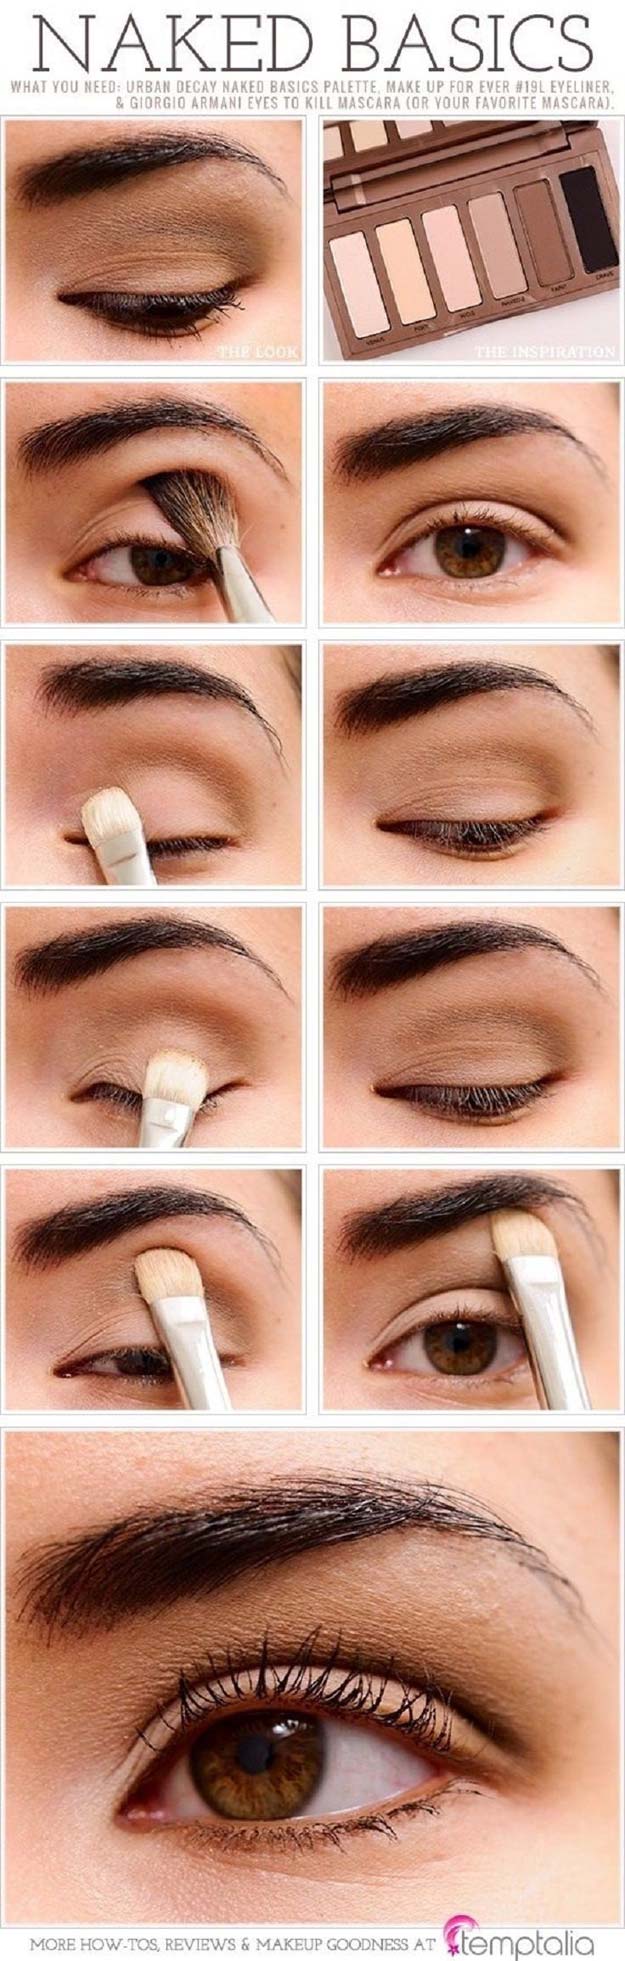 Best Eyeshadow Tutorials - Natural Look - Easy Step by Step How To For Eye Shadow - Cool Makeup Tricks and Eye Makeup Tutorial With Instructions - Quick Ways to Do Smoky Eye, Natural Makeup, Looks for Day and Evening, Brown and Blue Eyes - Cool Ideas for Beginners and Teens 